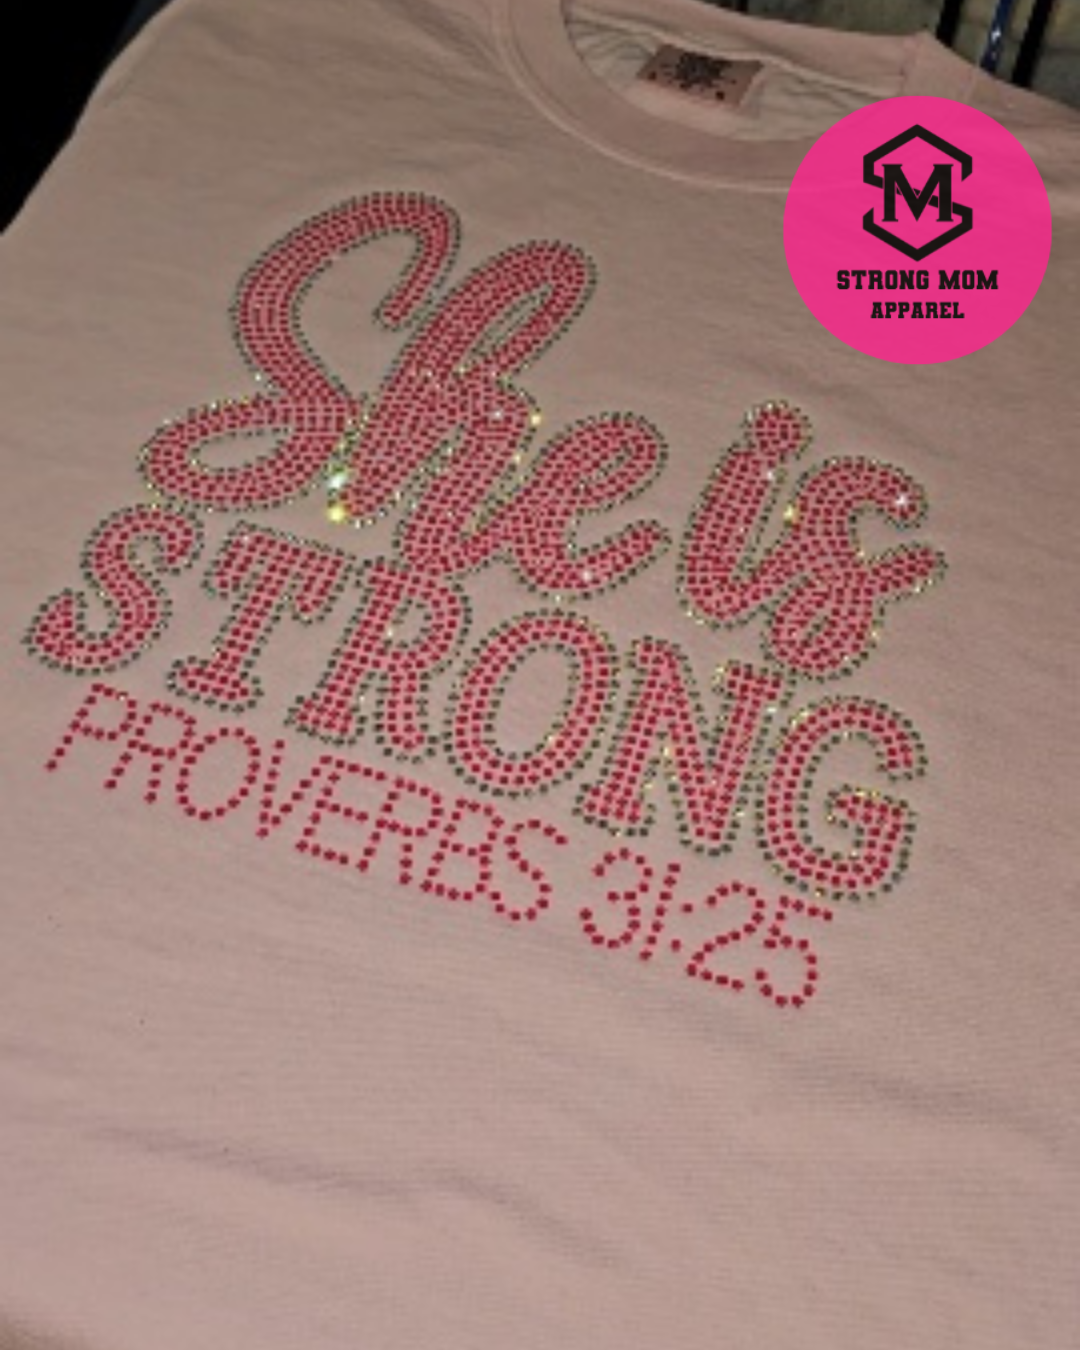 She is STRONG - Proverbs 31:25